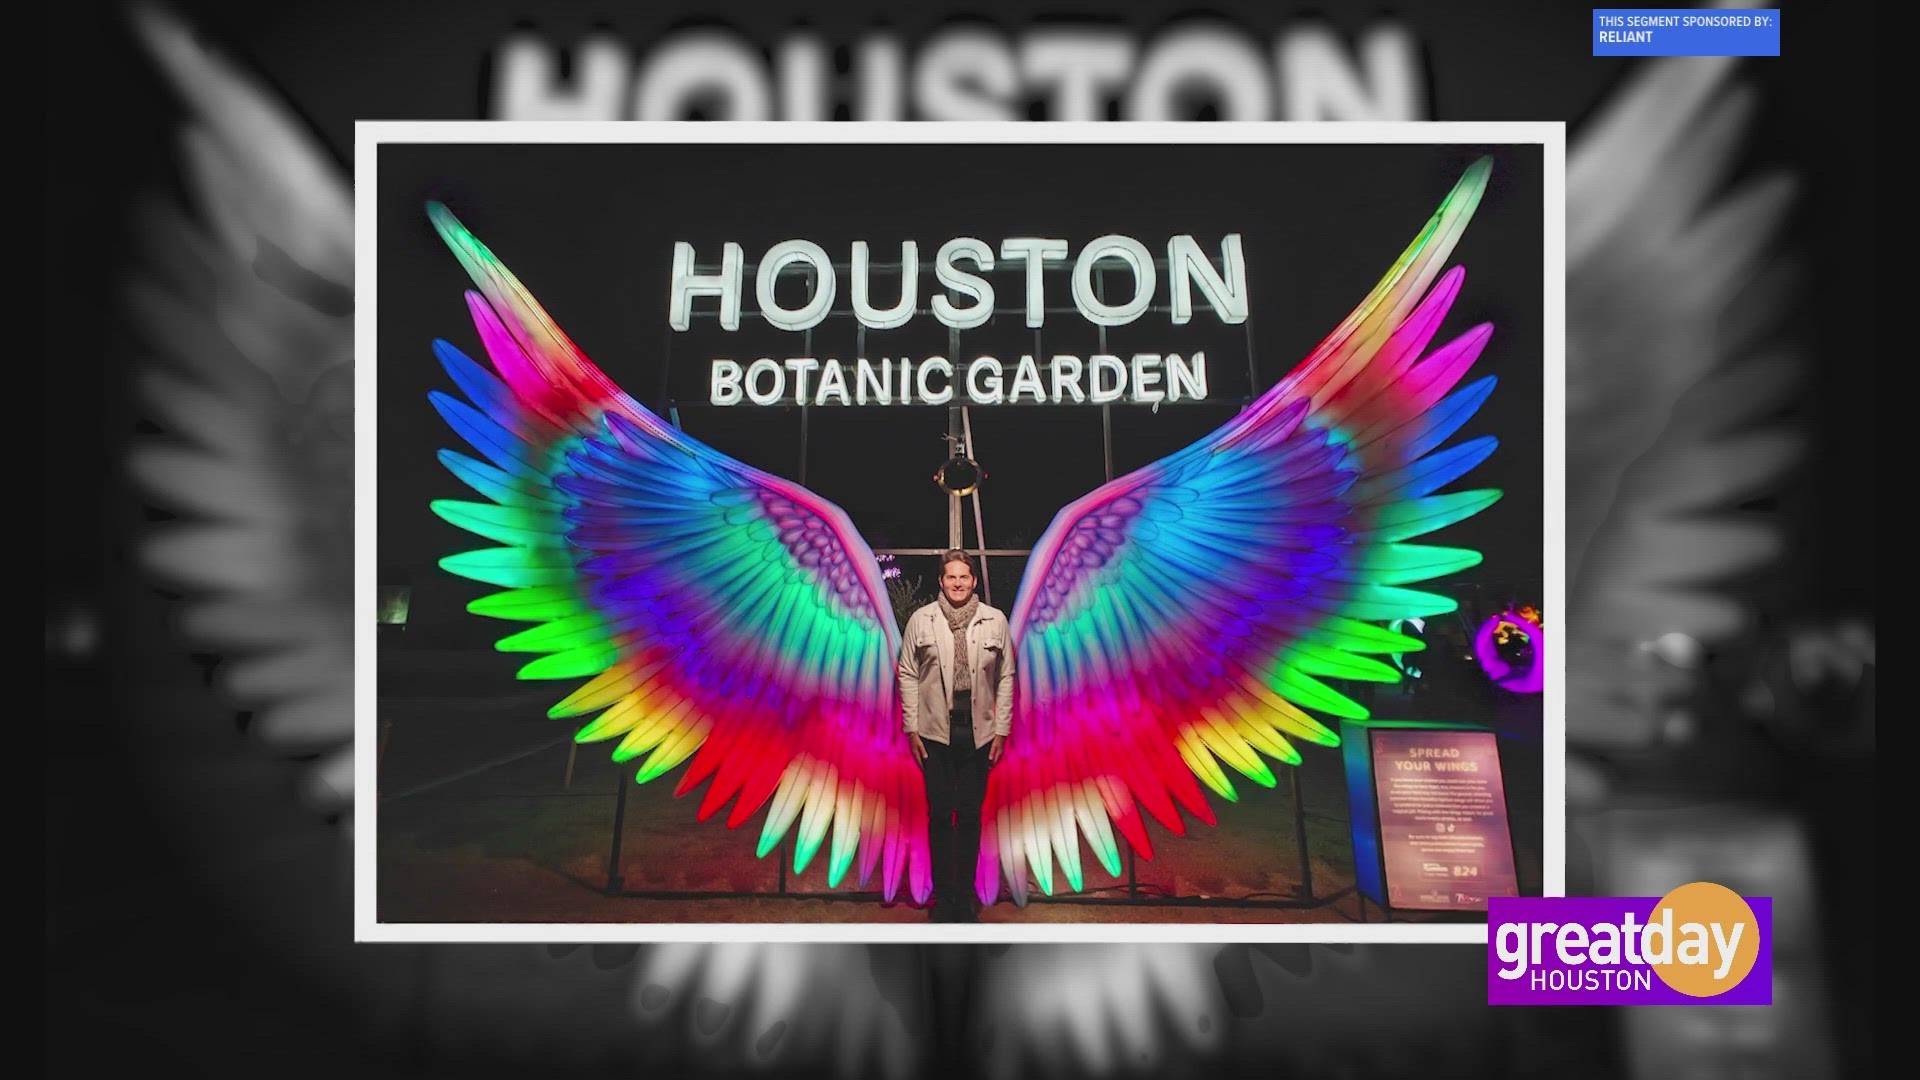 Light up your life at the Houston Botanic Garden. Radiant Nature, presented by Reliant, is the perfect way to celebrate Lunar New Year in spectacular fashion.